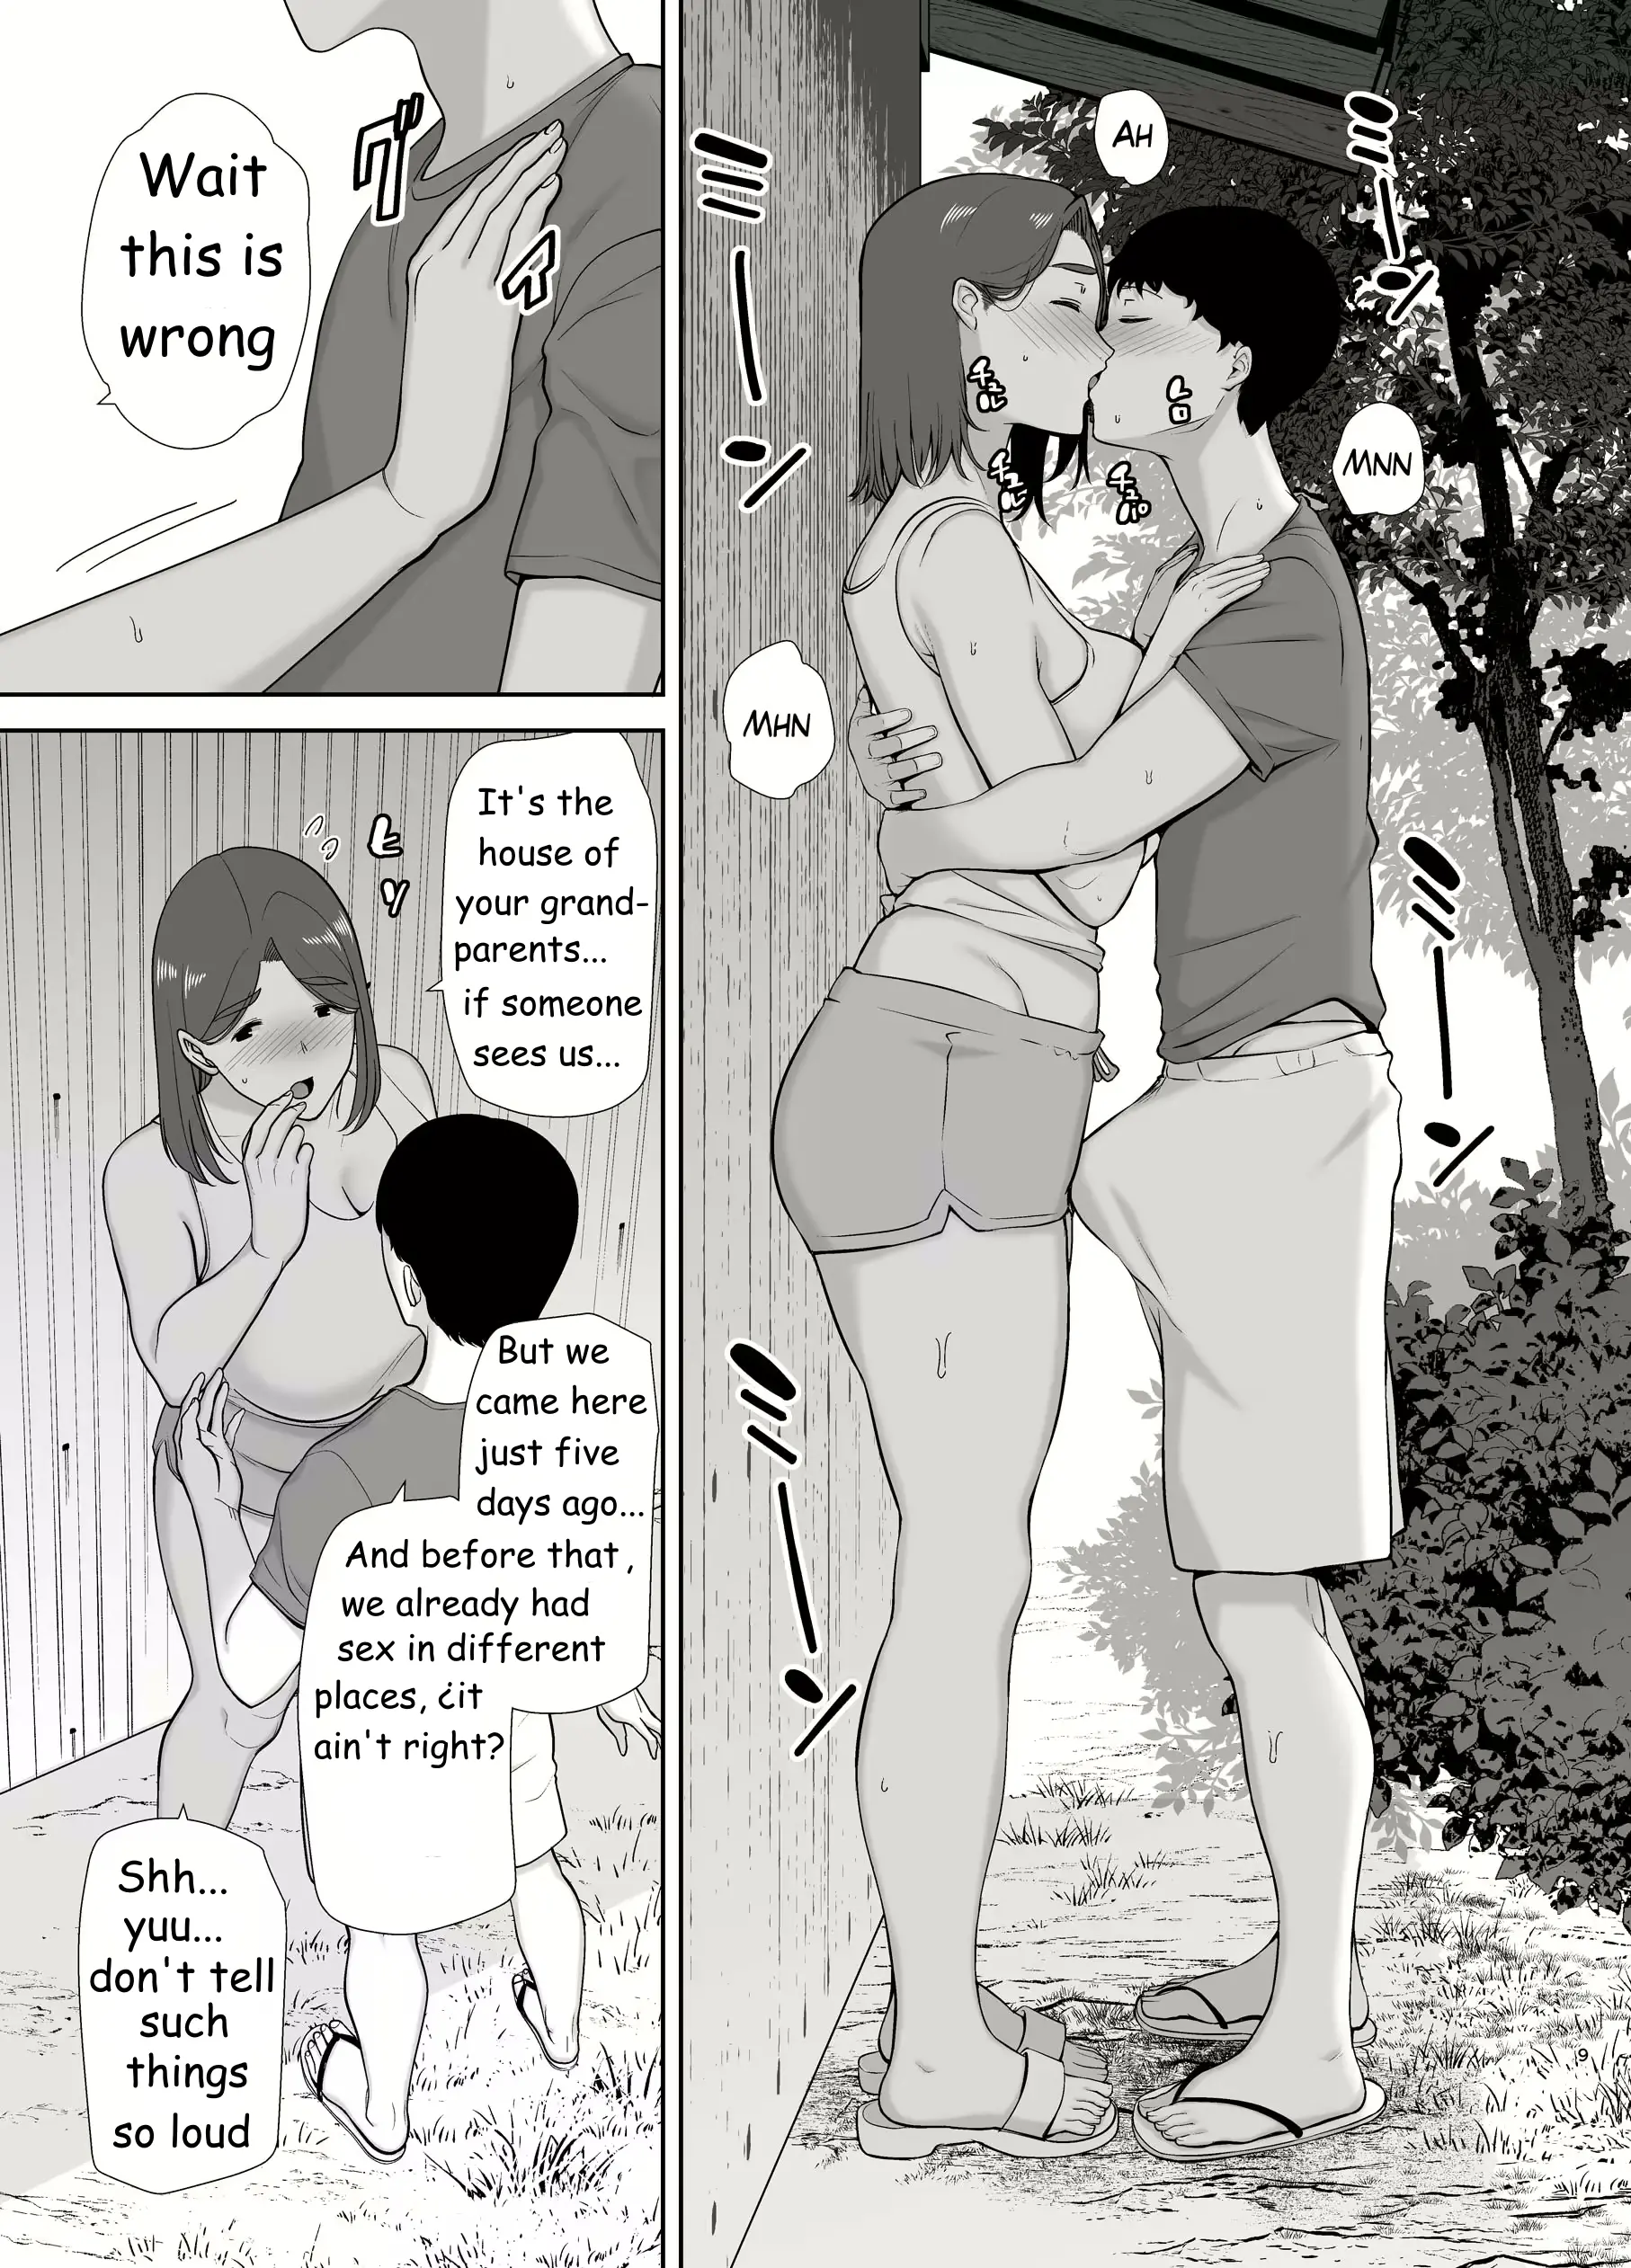 Incest hentai comics - I fell in love with my mother and now I want to fuck her 5